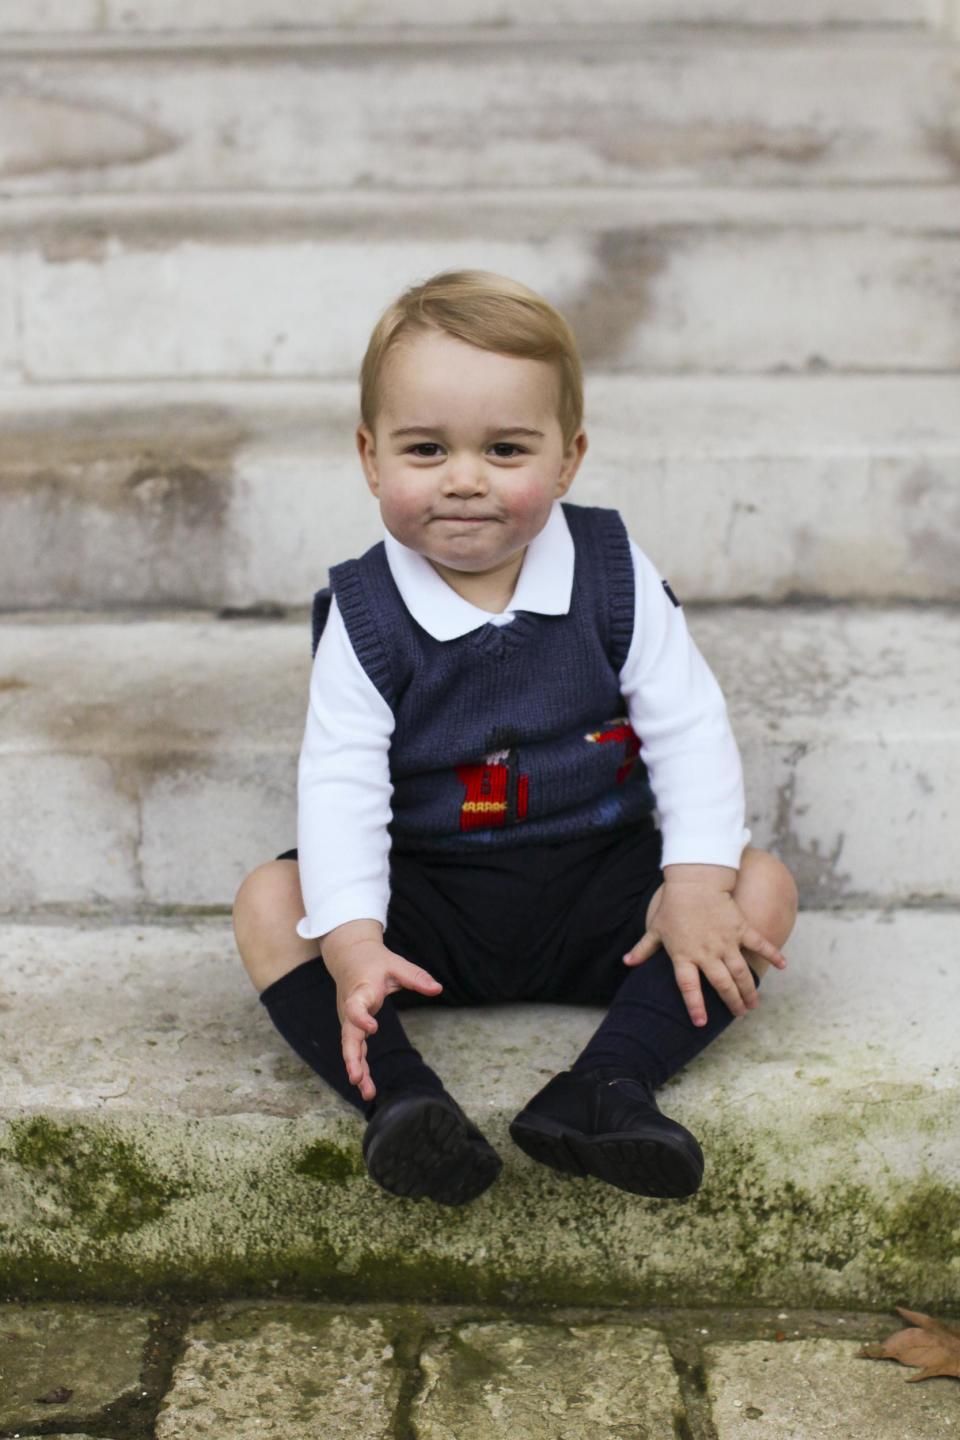 Why Kate Middleton's birthday portraits of Prince George, Louis and Princess Charlotte are relatable